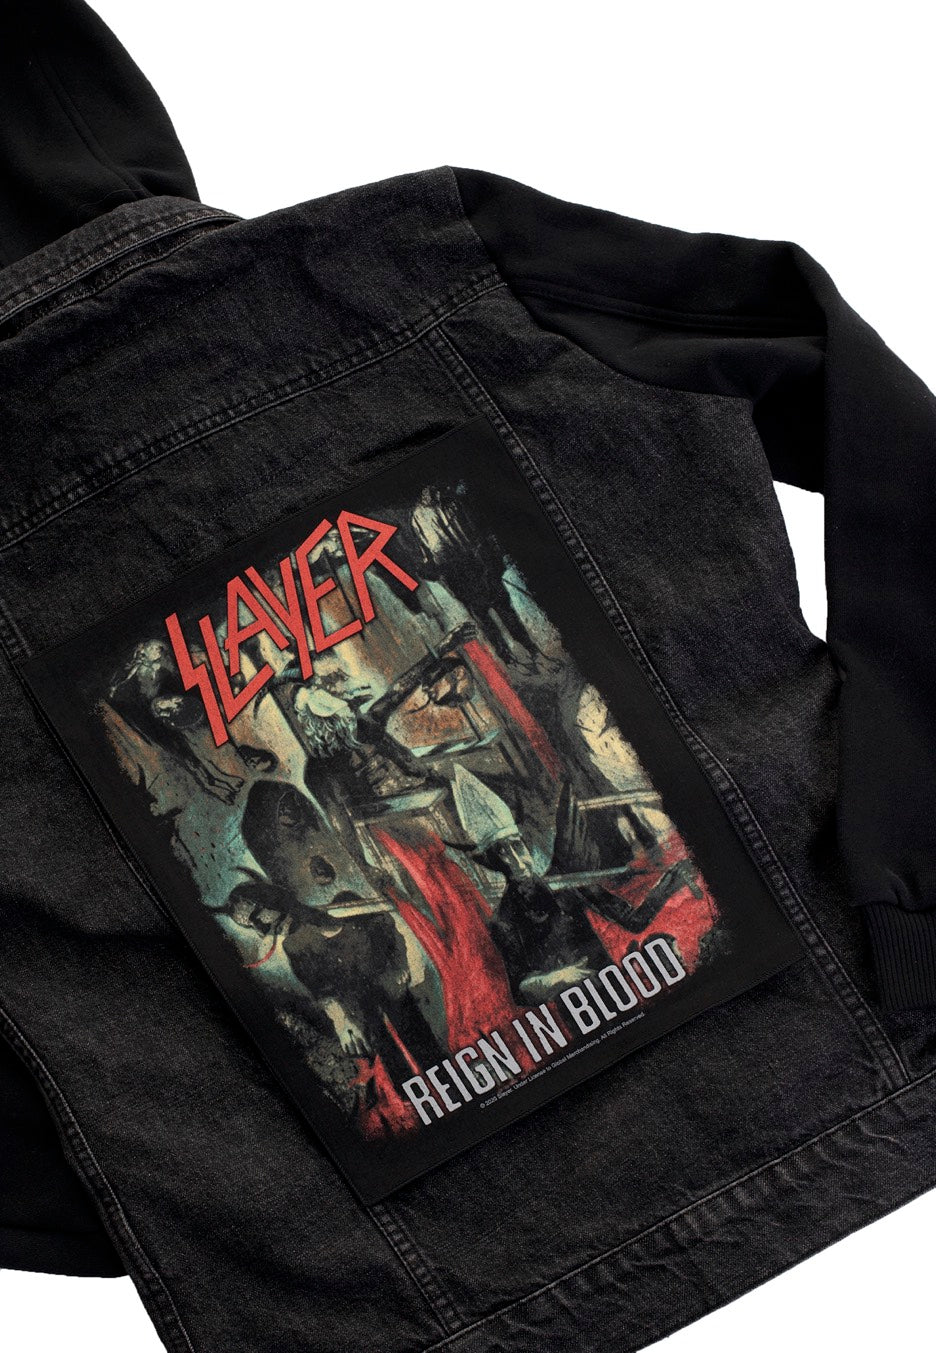 Slayer - Reign In Blood - Backpatch